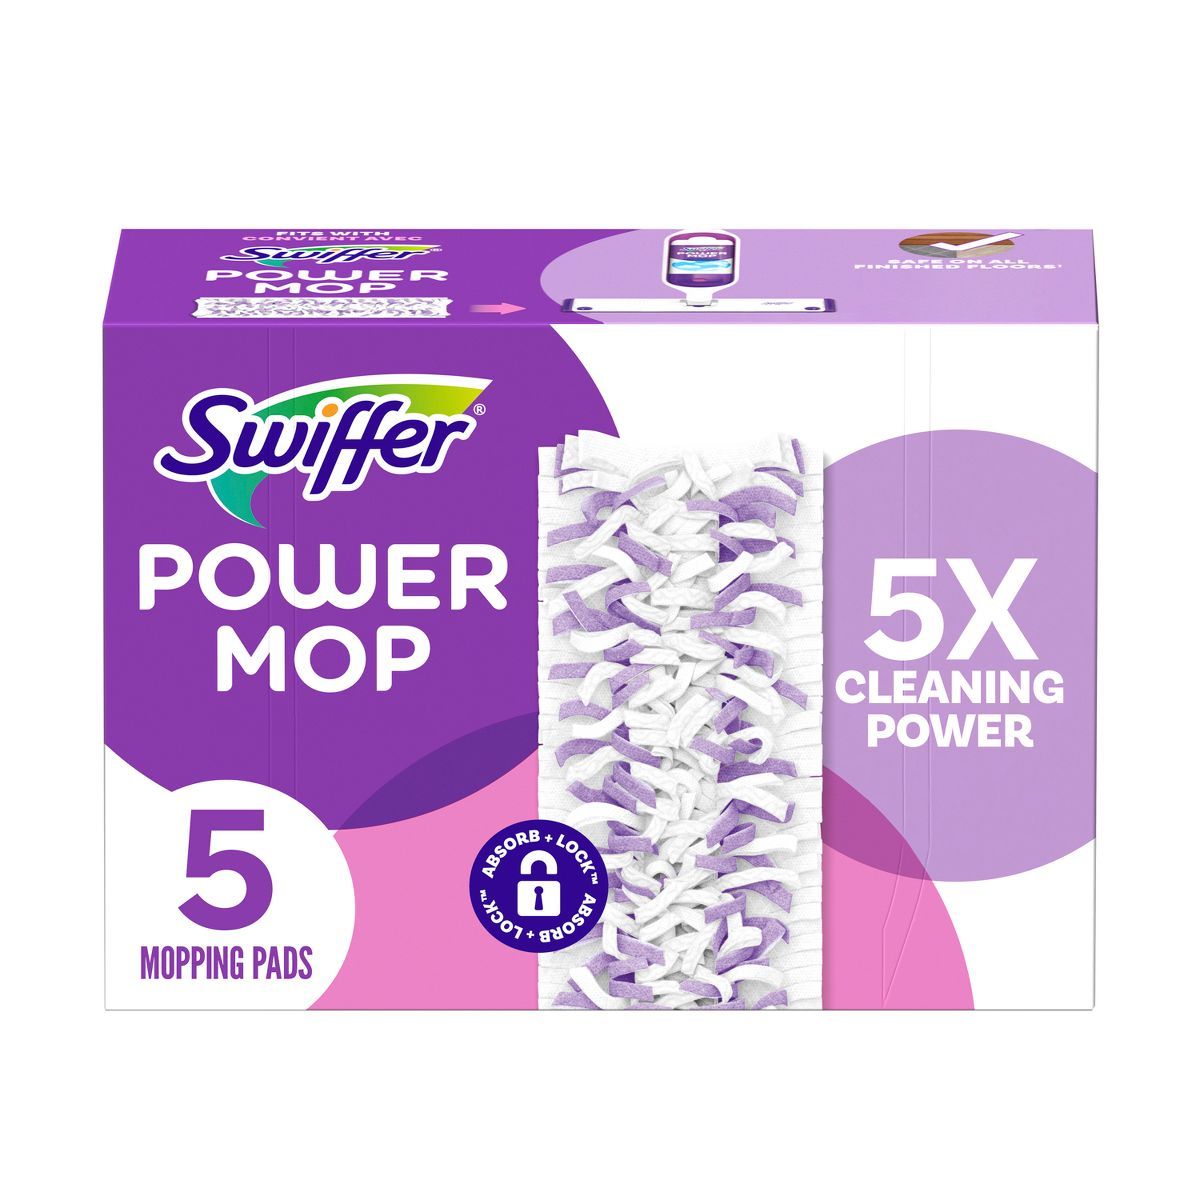 Swiffer Power Mop Multi-Surface Mopping Pad Refills for Floor Cleaning | Target